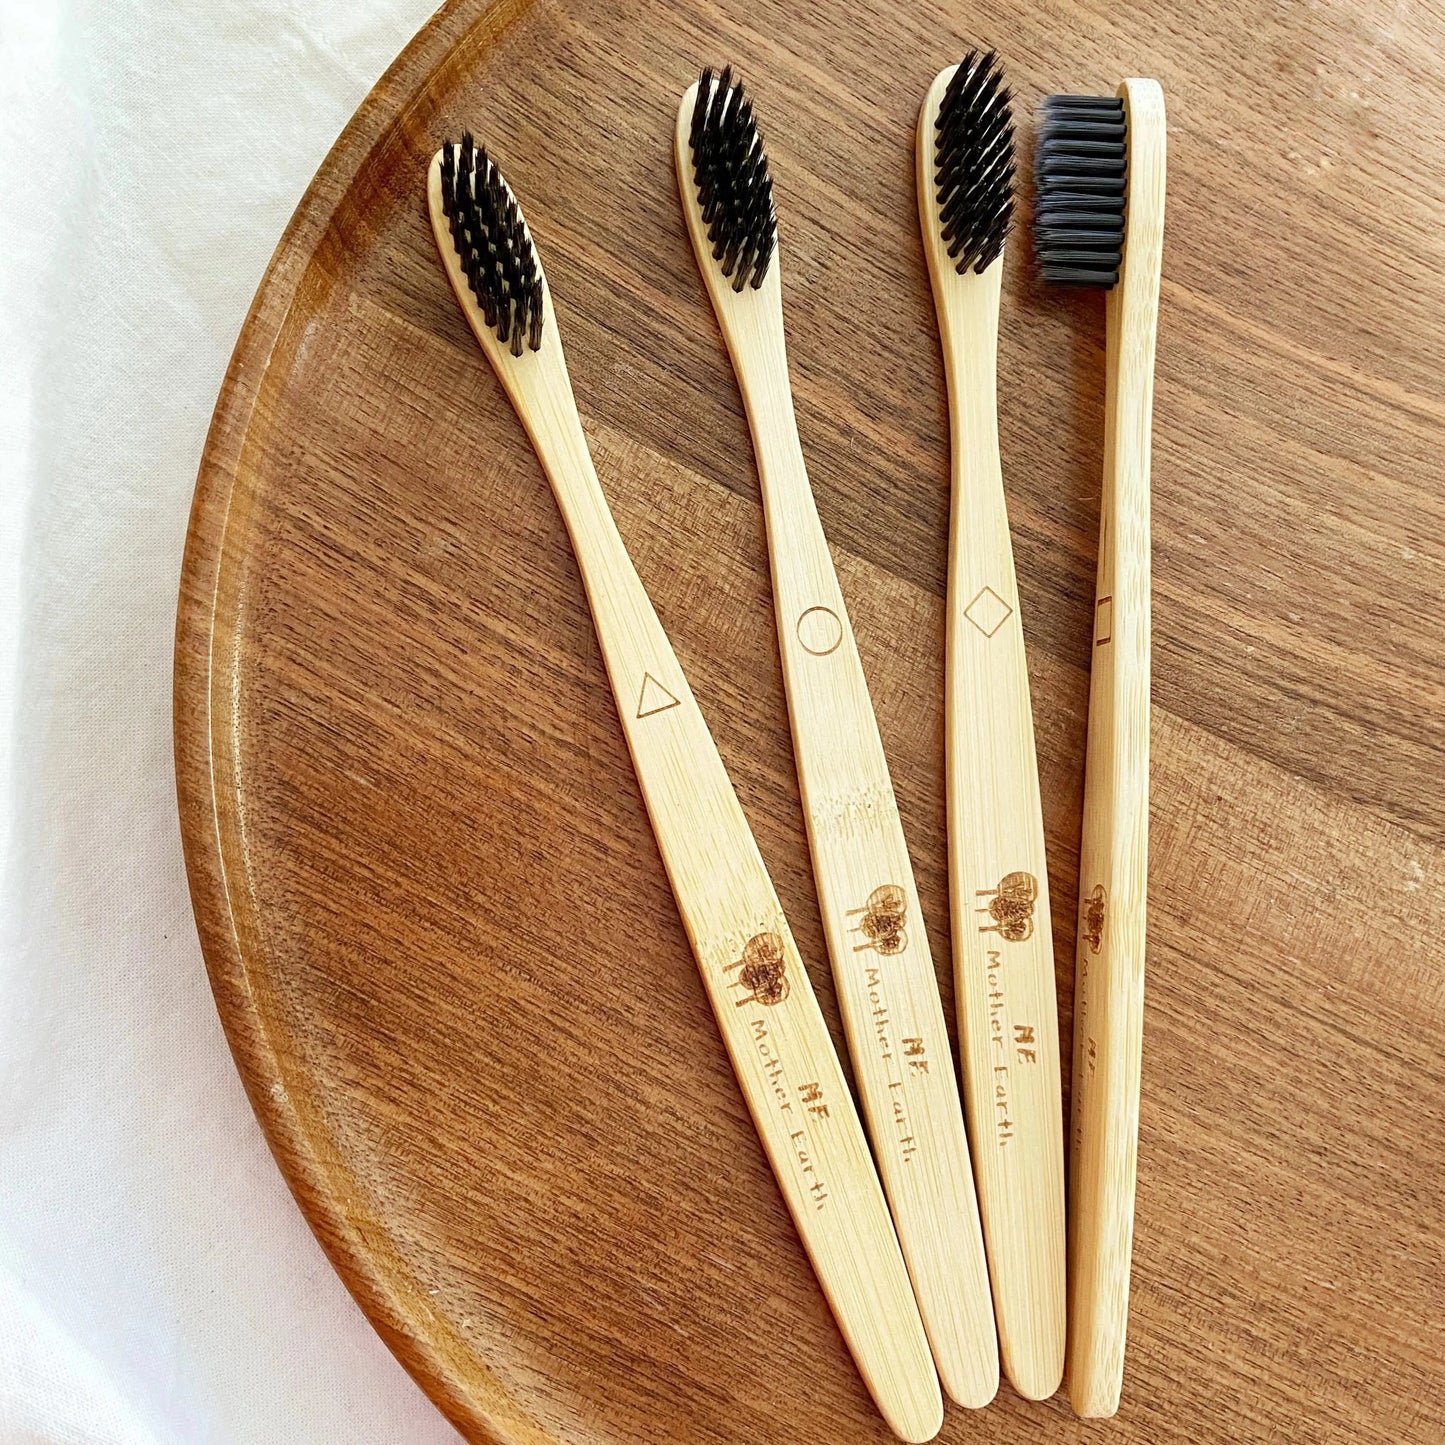 bamboo tooth brushes with active carbon bristles extra soft.  geometric shapes to tell them apart.  Displayed on walnut wood tray